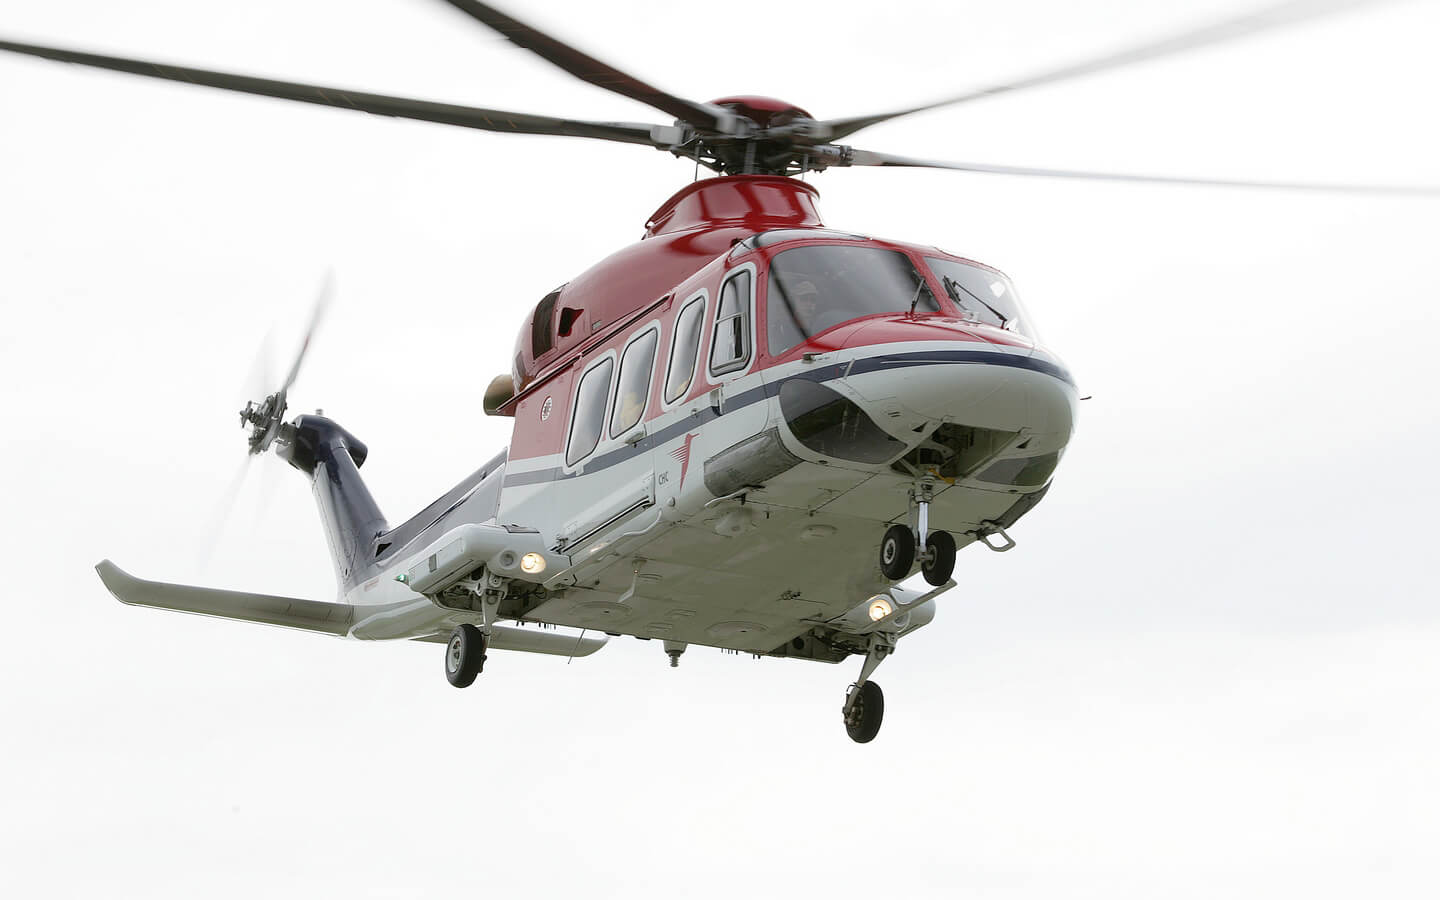 Flights supporting the operation from CHC's base in Den Helder using AW139s began in the beginning of January 2017. Leonardo Photo